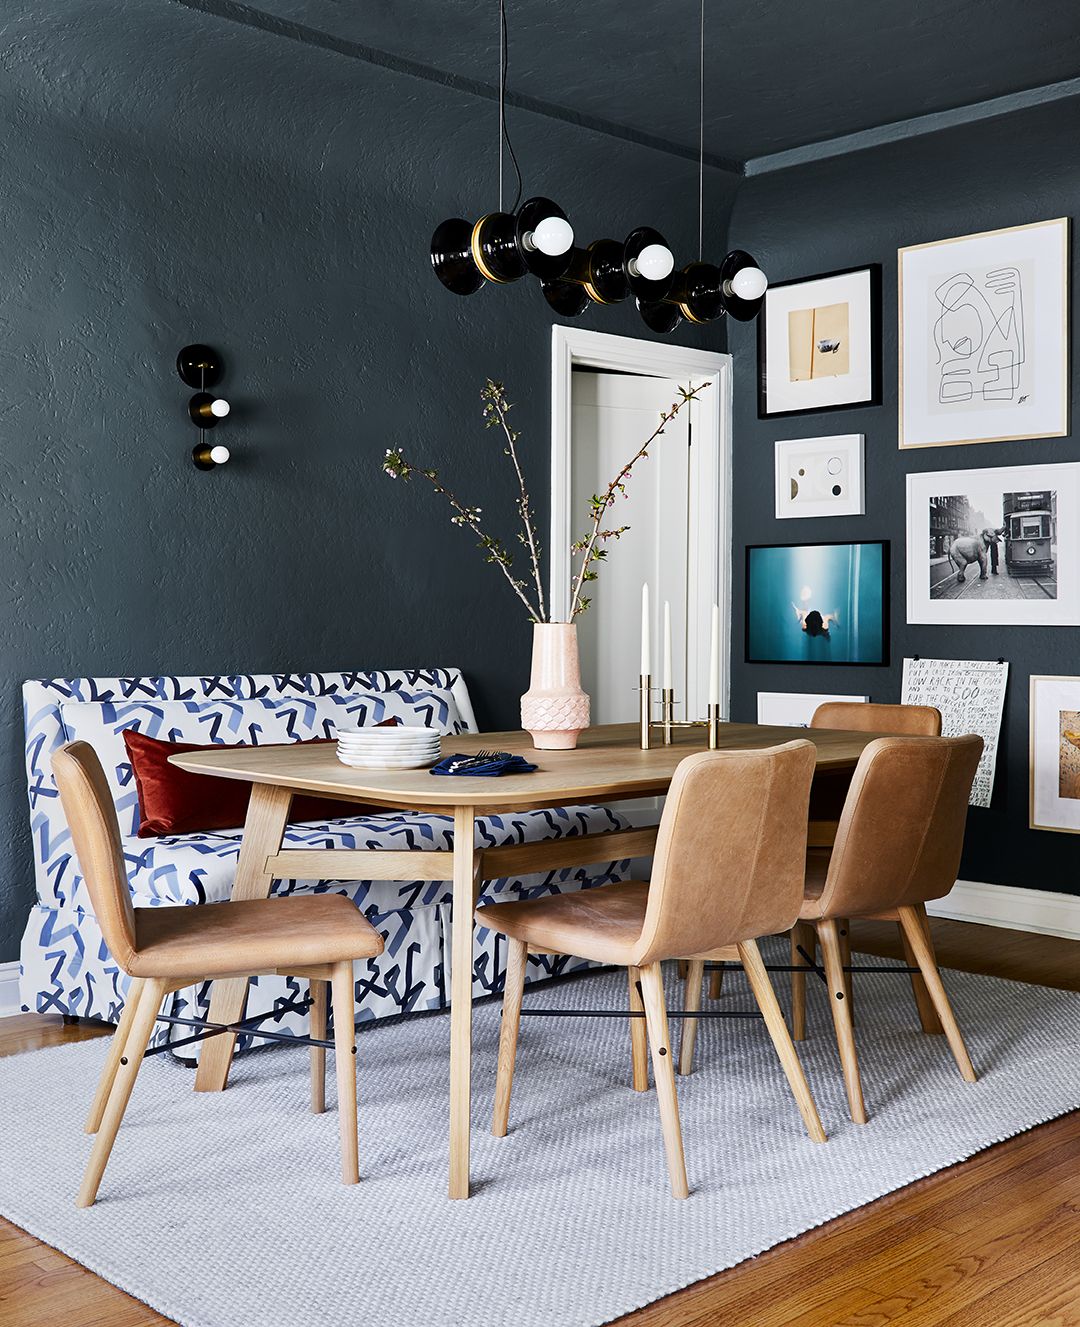 4 Elegant Dining Room Decor Ideas to Make Your Space Cozy - Indian Artisans